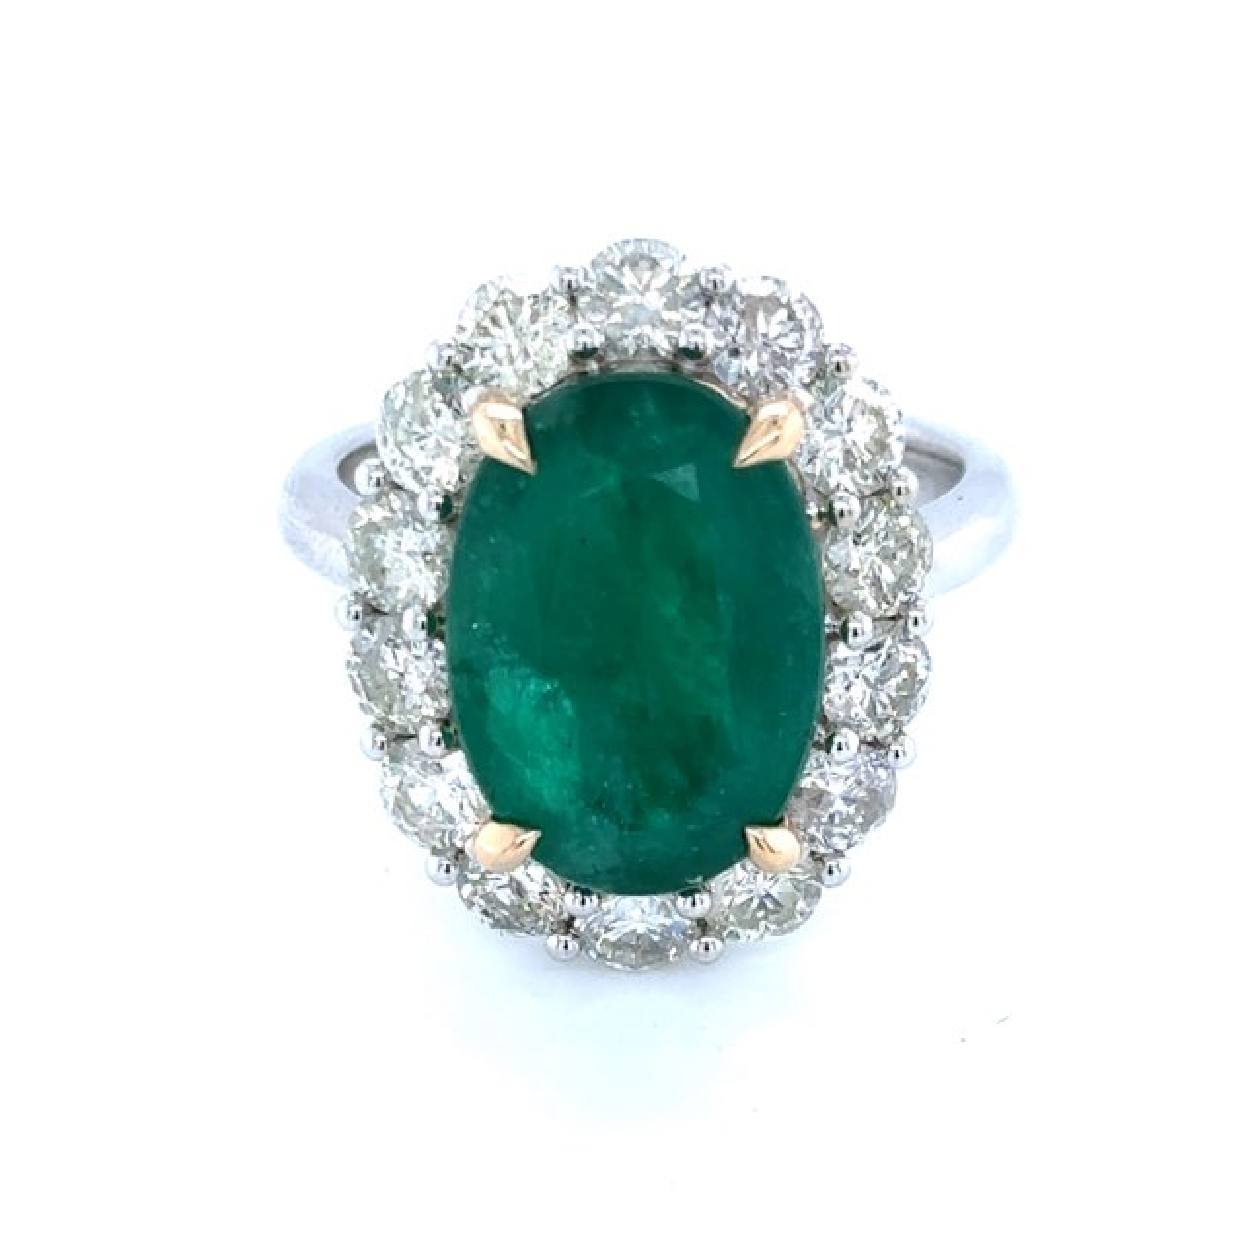 14K Yellow Gold and Platinum Ring Oval Emerald 5.395CT with Diamond Halo 1.95CT

Size 6.75